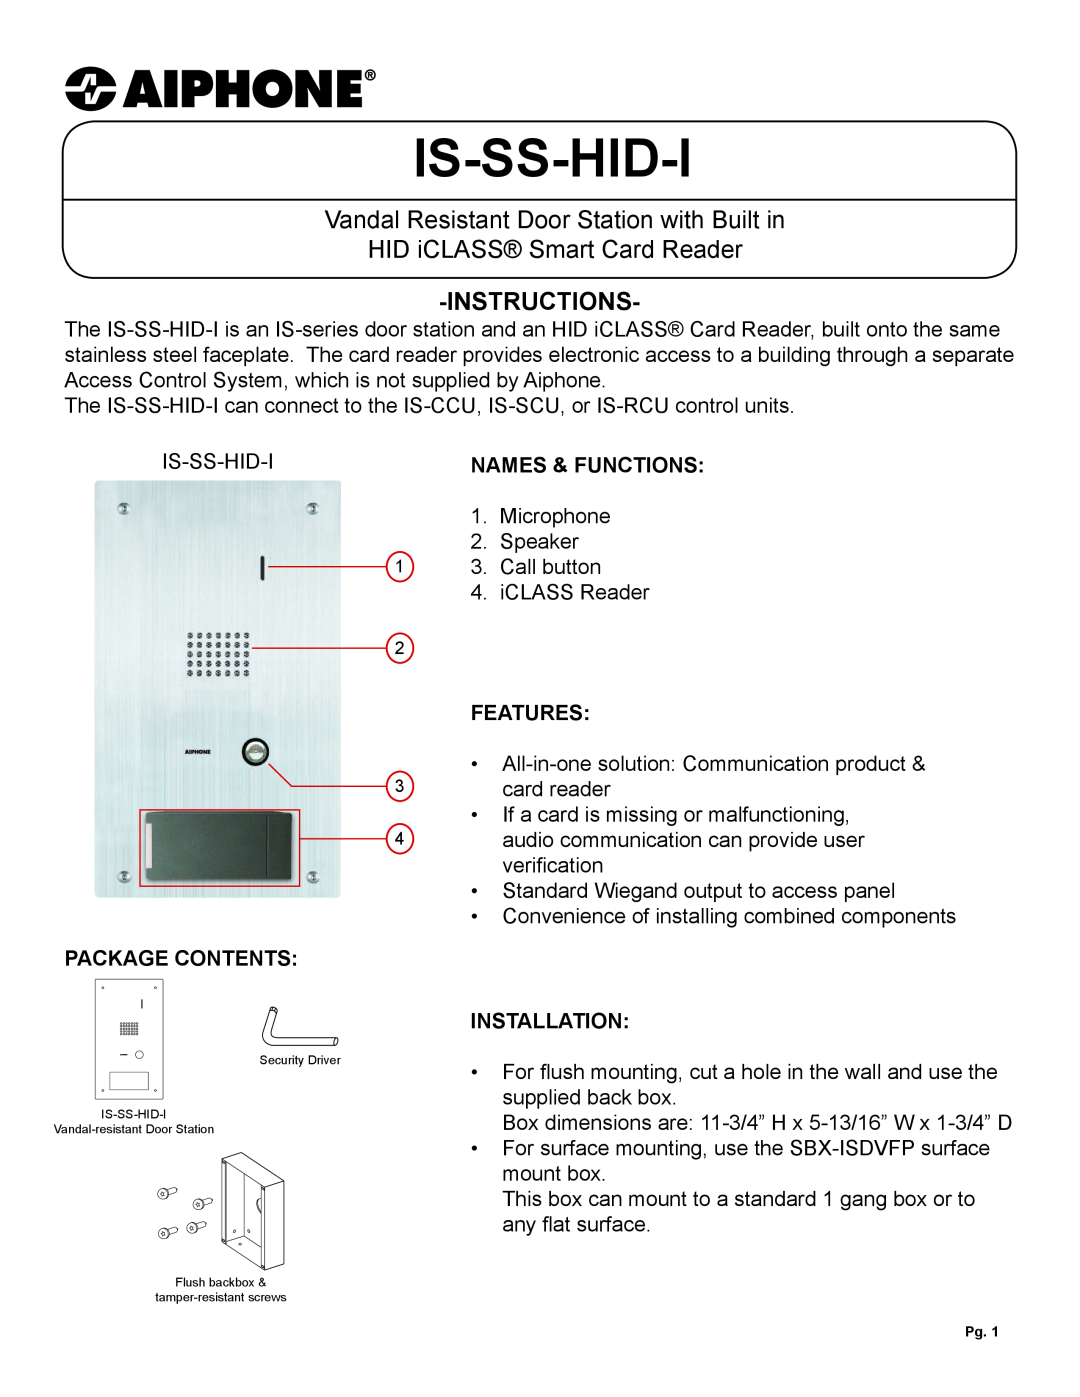 Aiphone IS-SS-HID-I dimensions Package Contents, Names & Functions, Features, Installation, Is-Ss-Hid-I, Instructions 